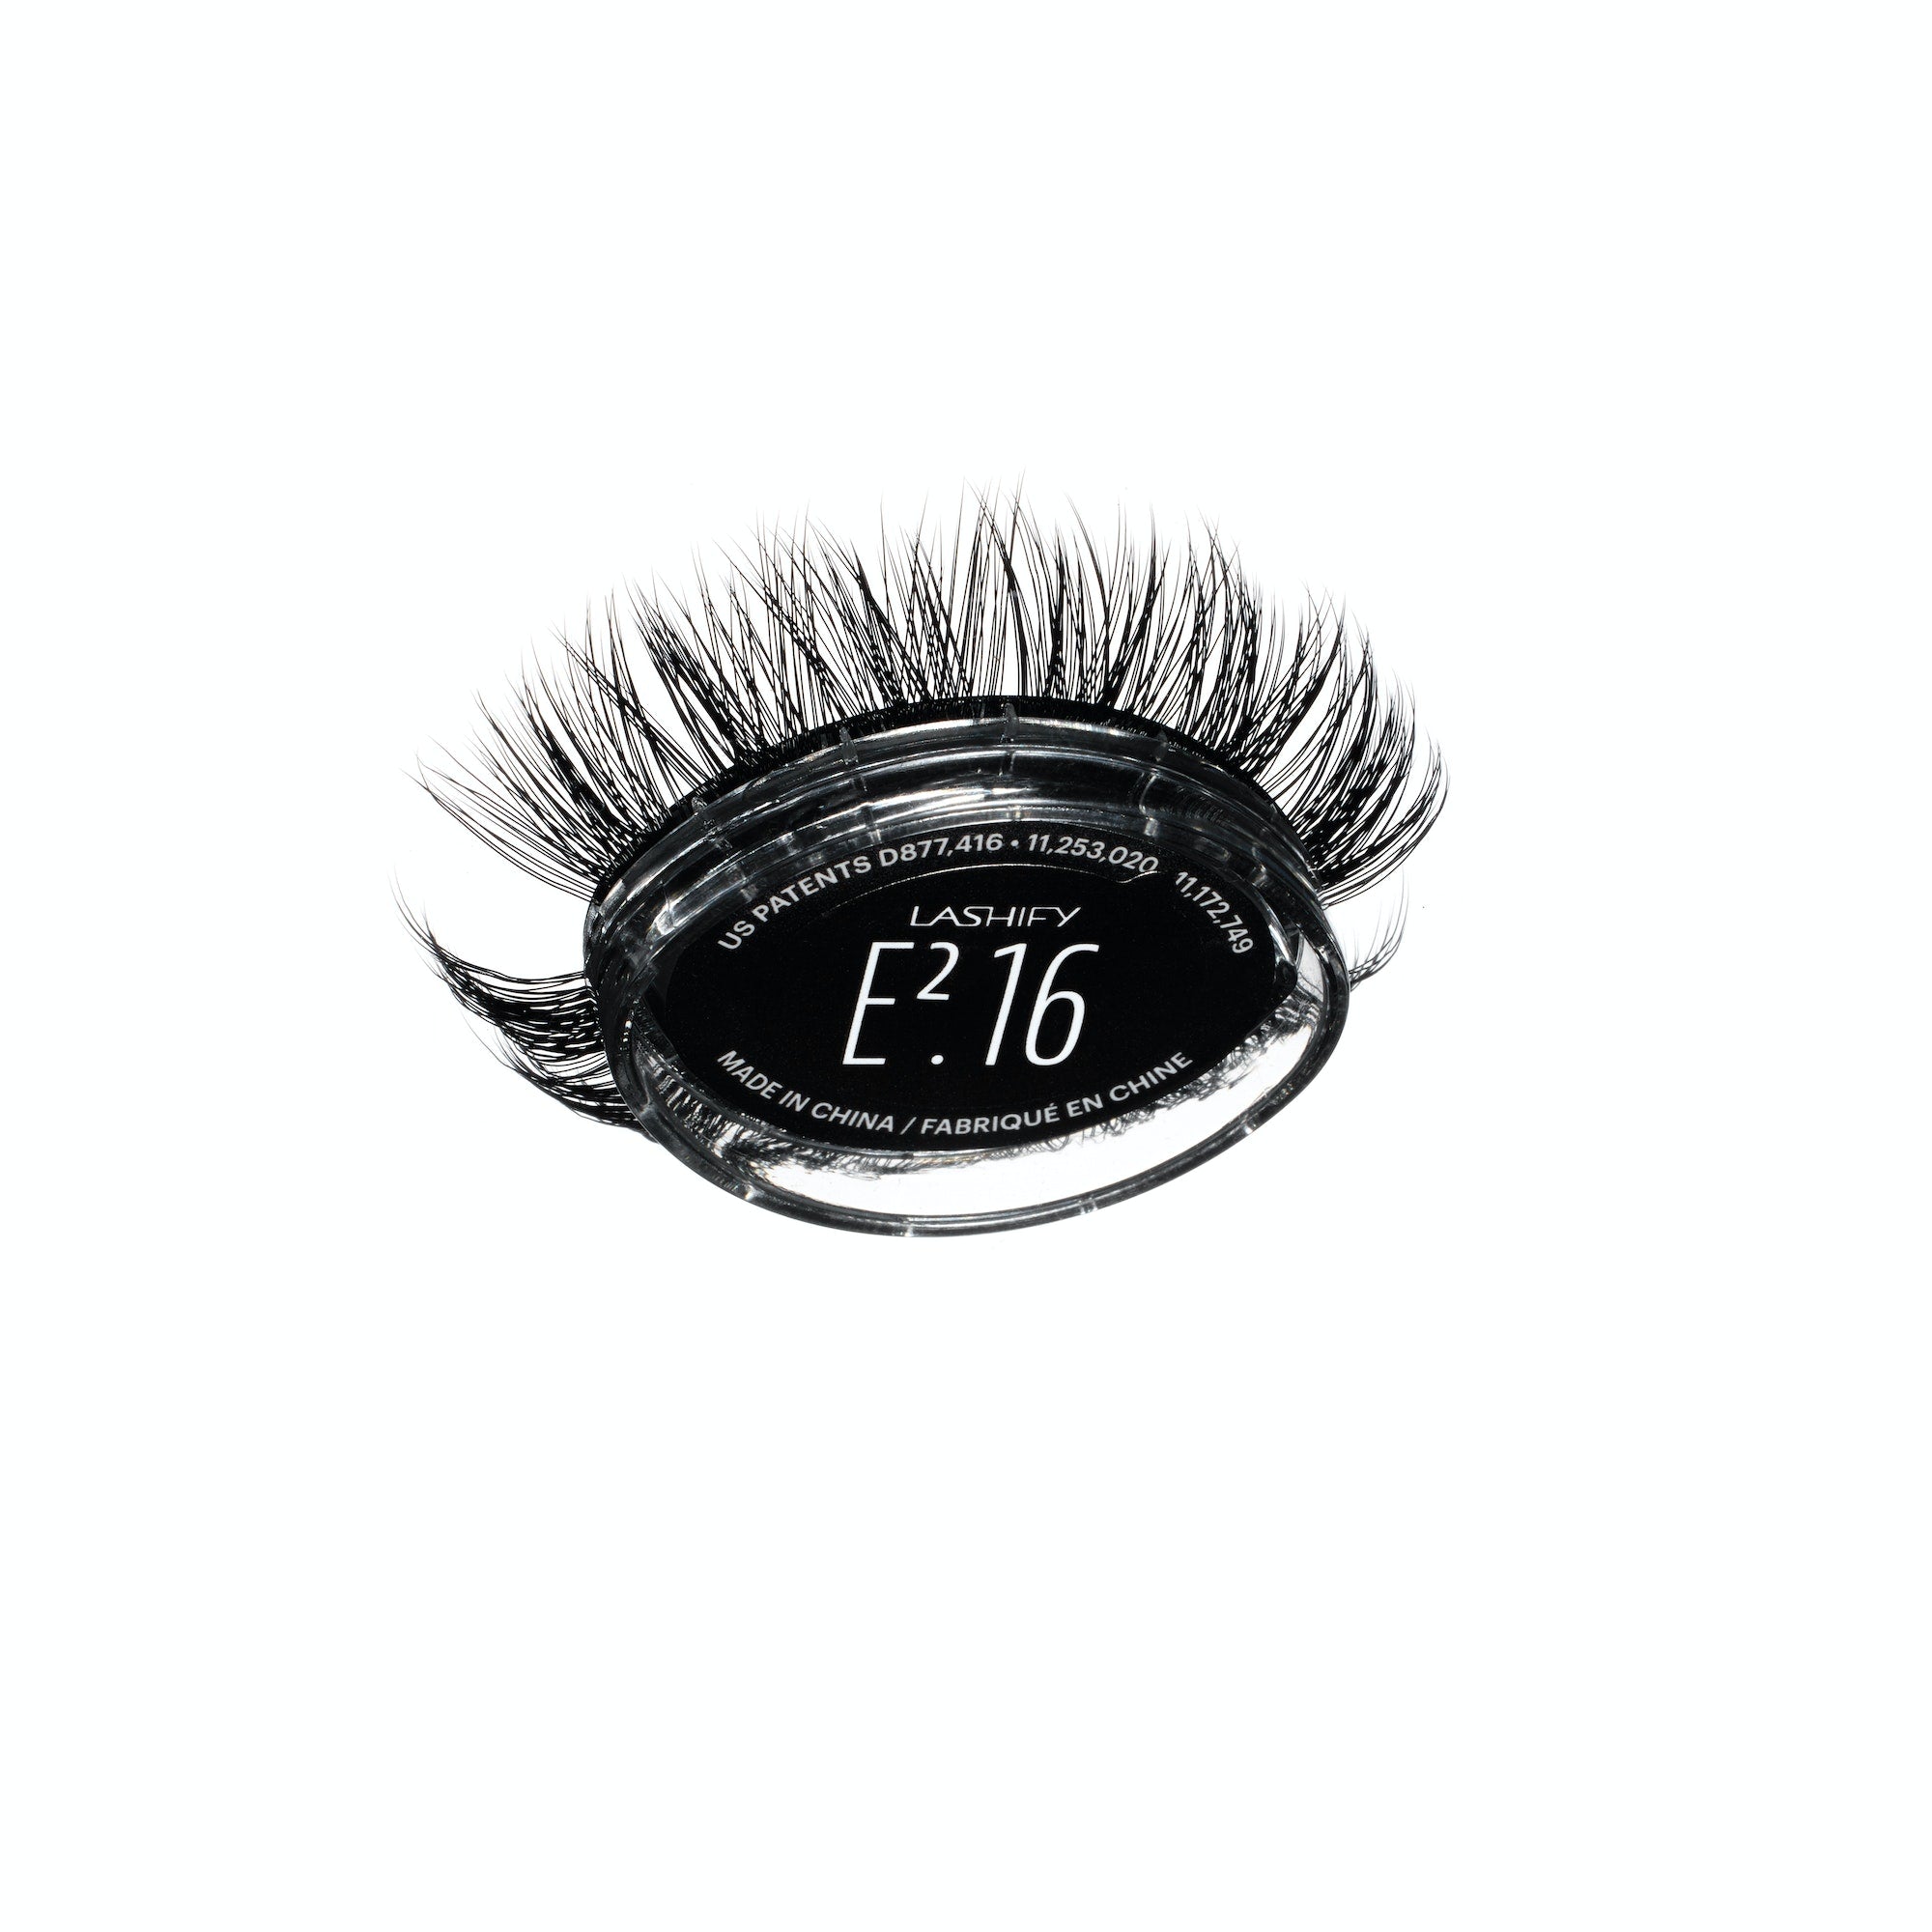 Extreme² Gossamer® Lashes with Griptex™ - Pro Pack (2 count)